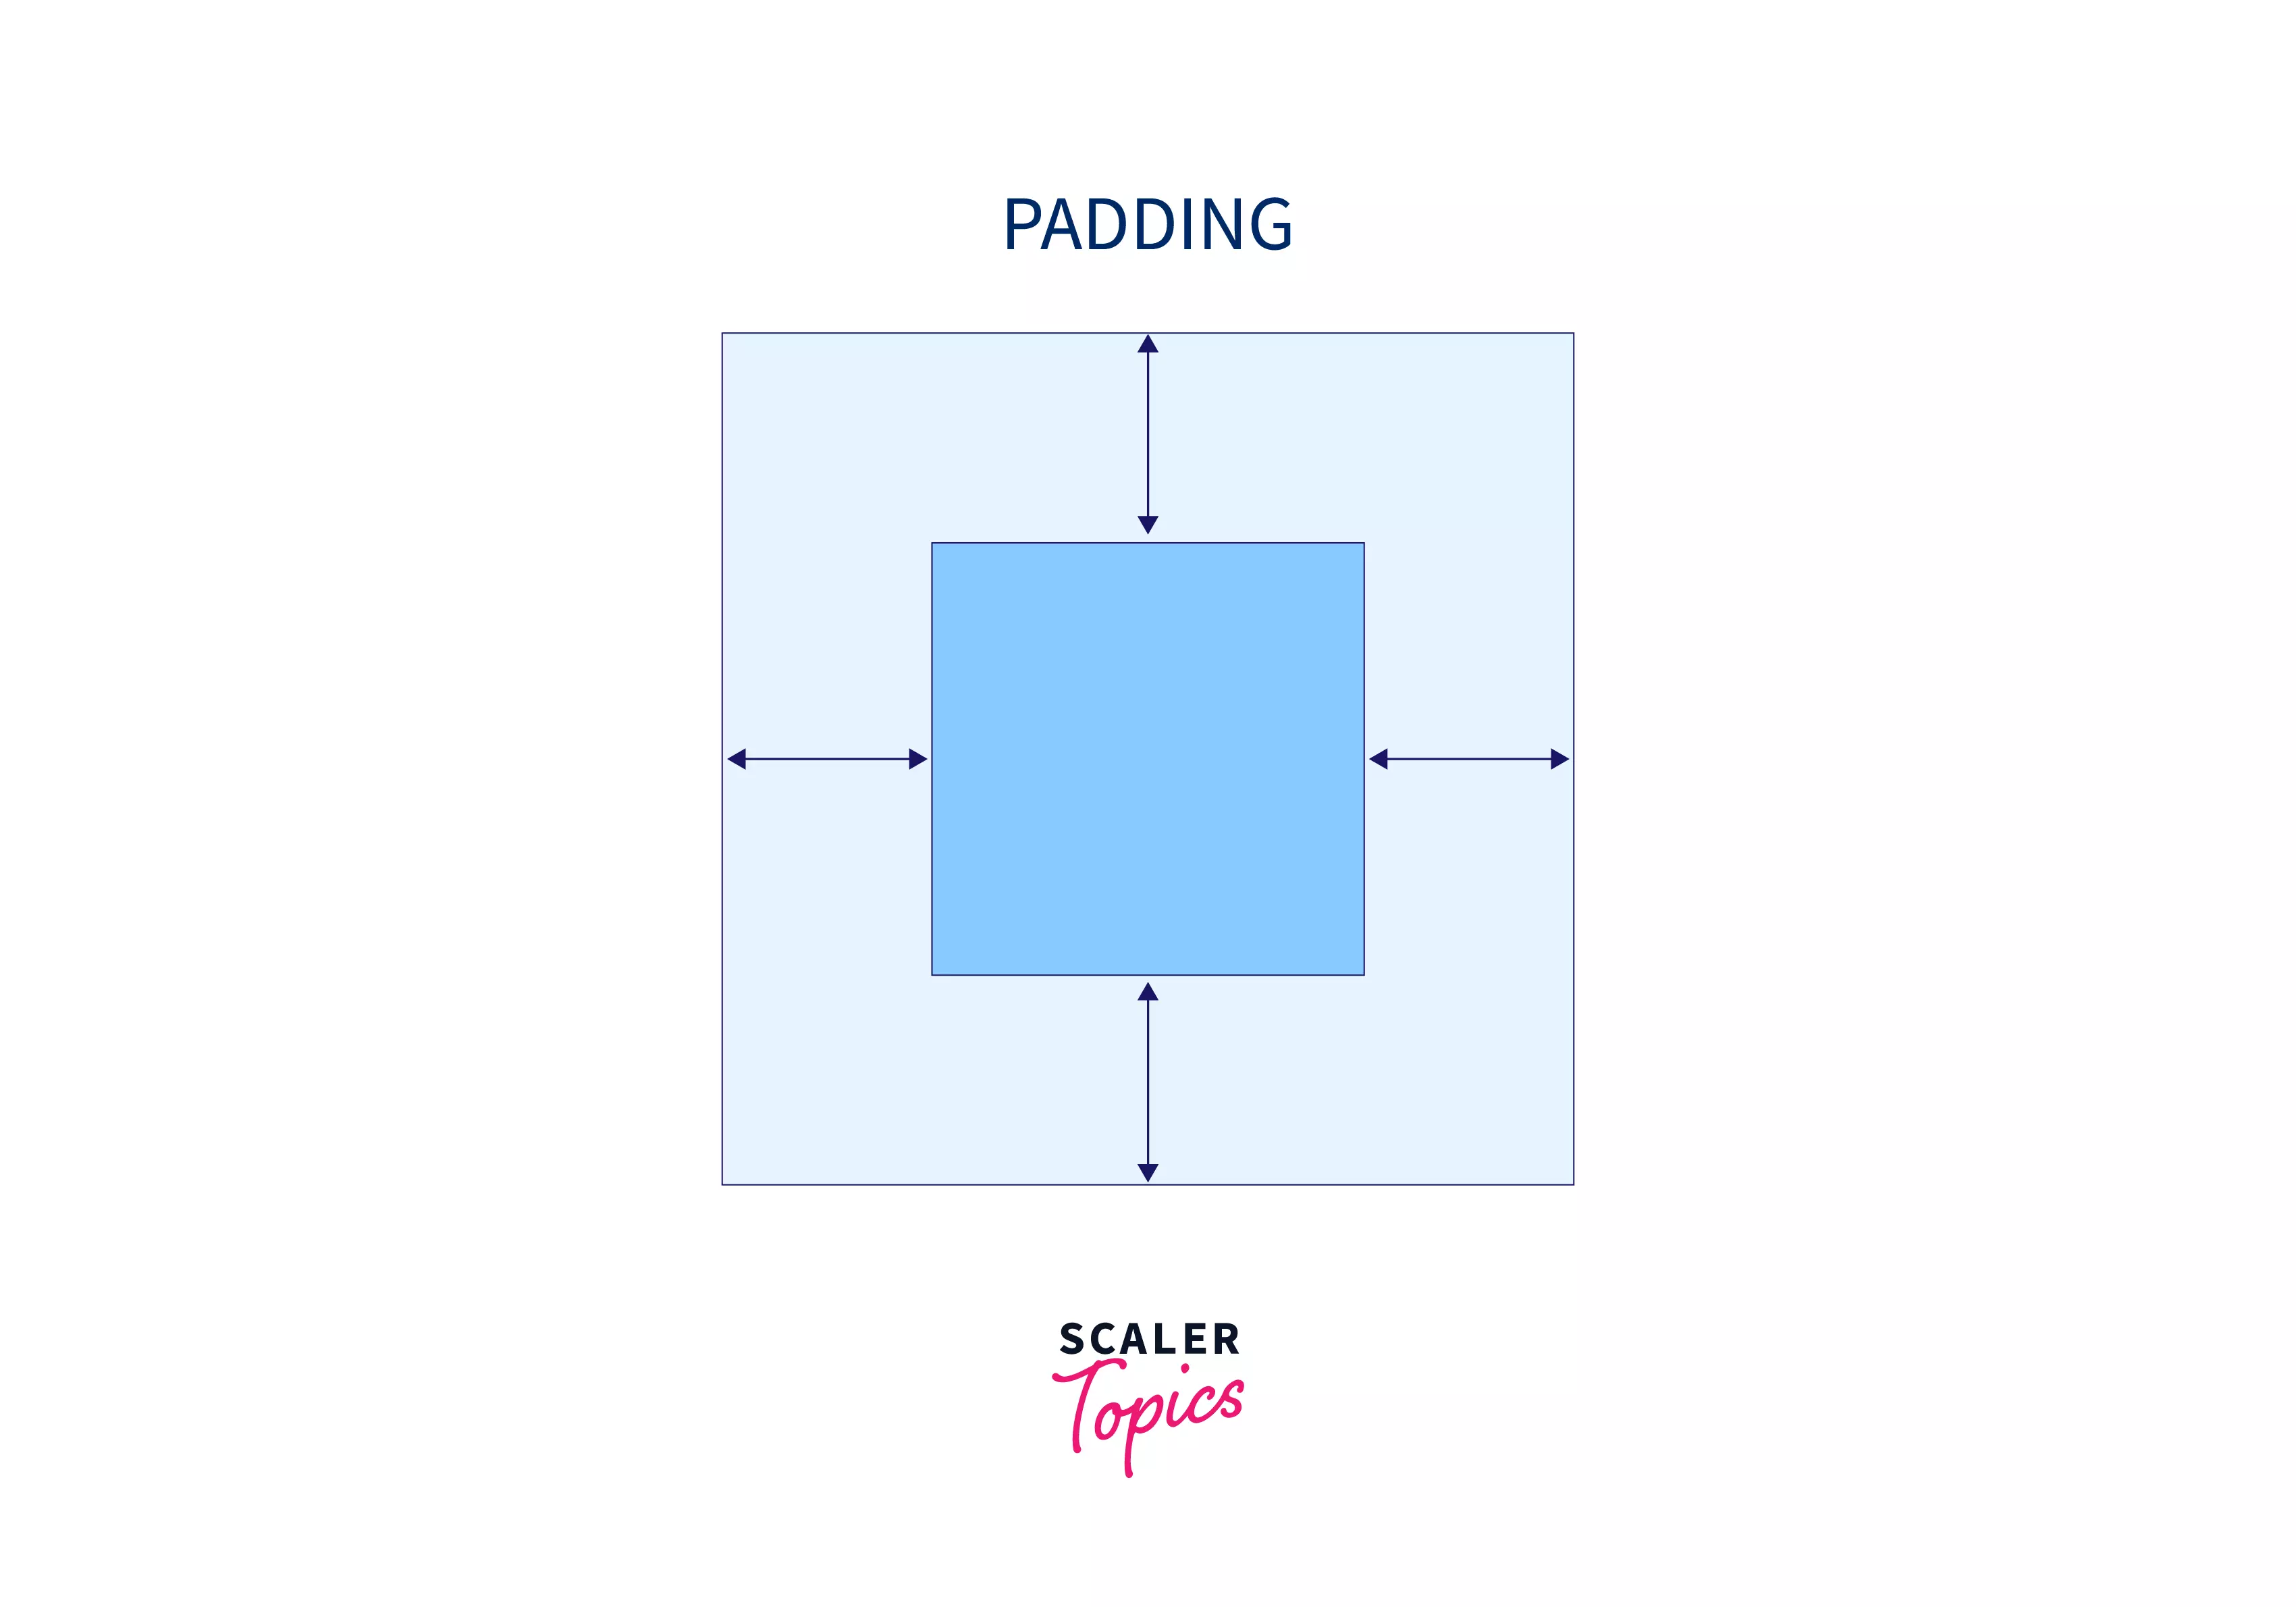 How to Add Padding in CSS